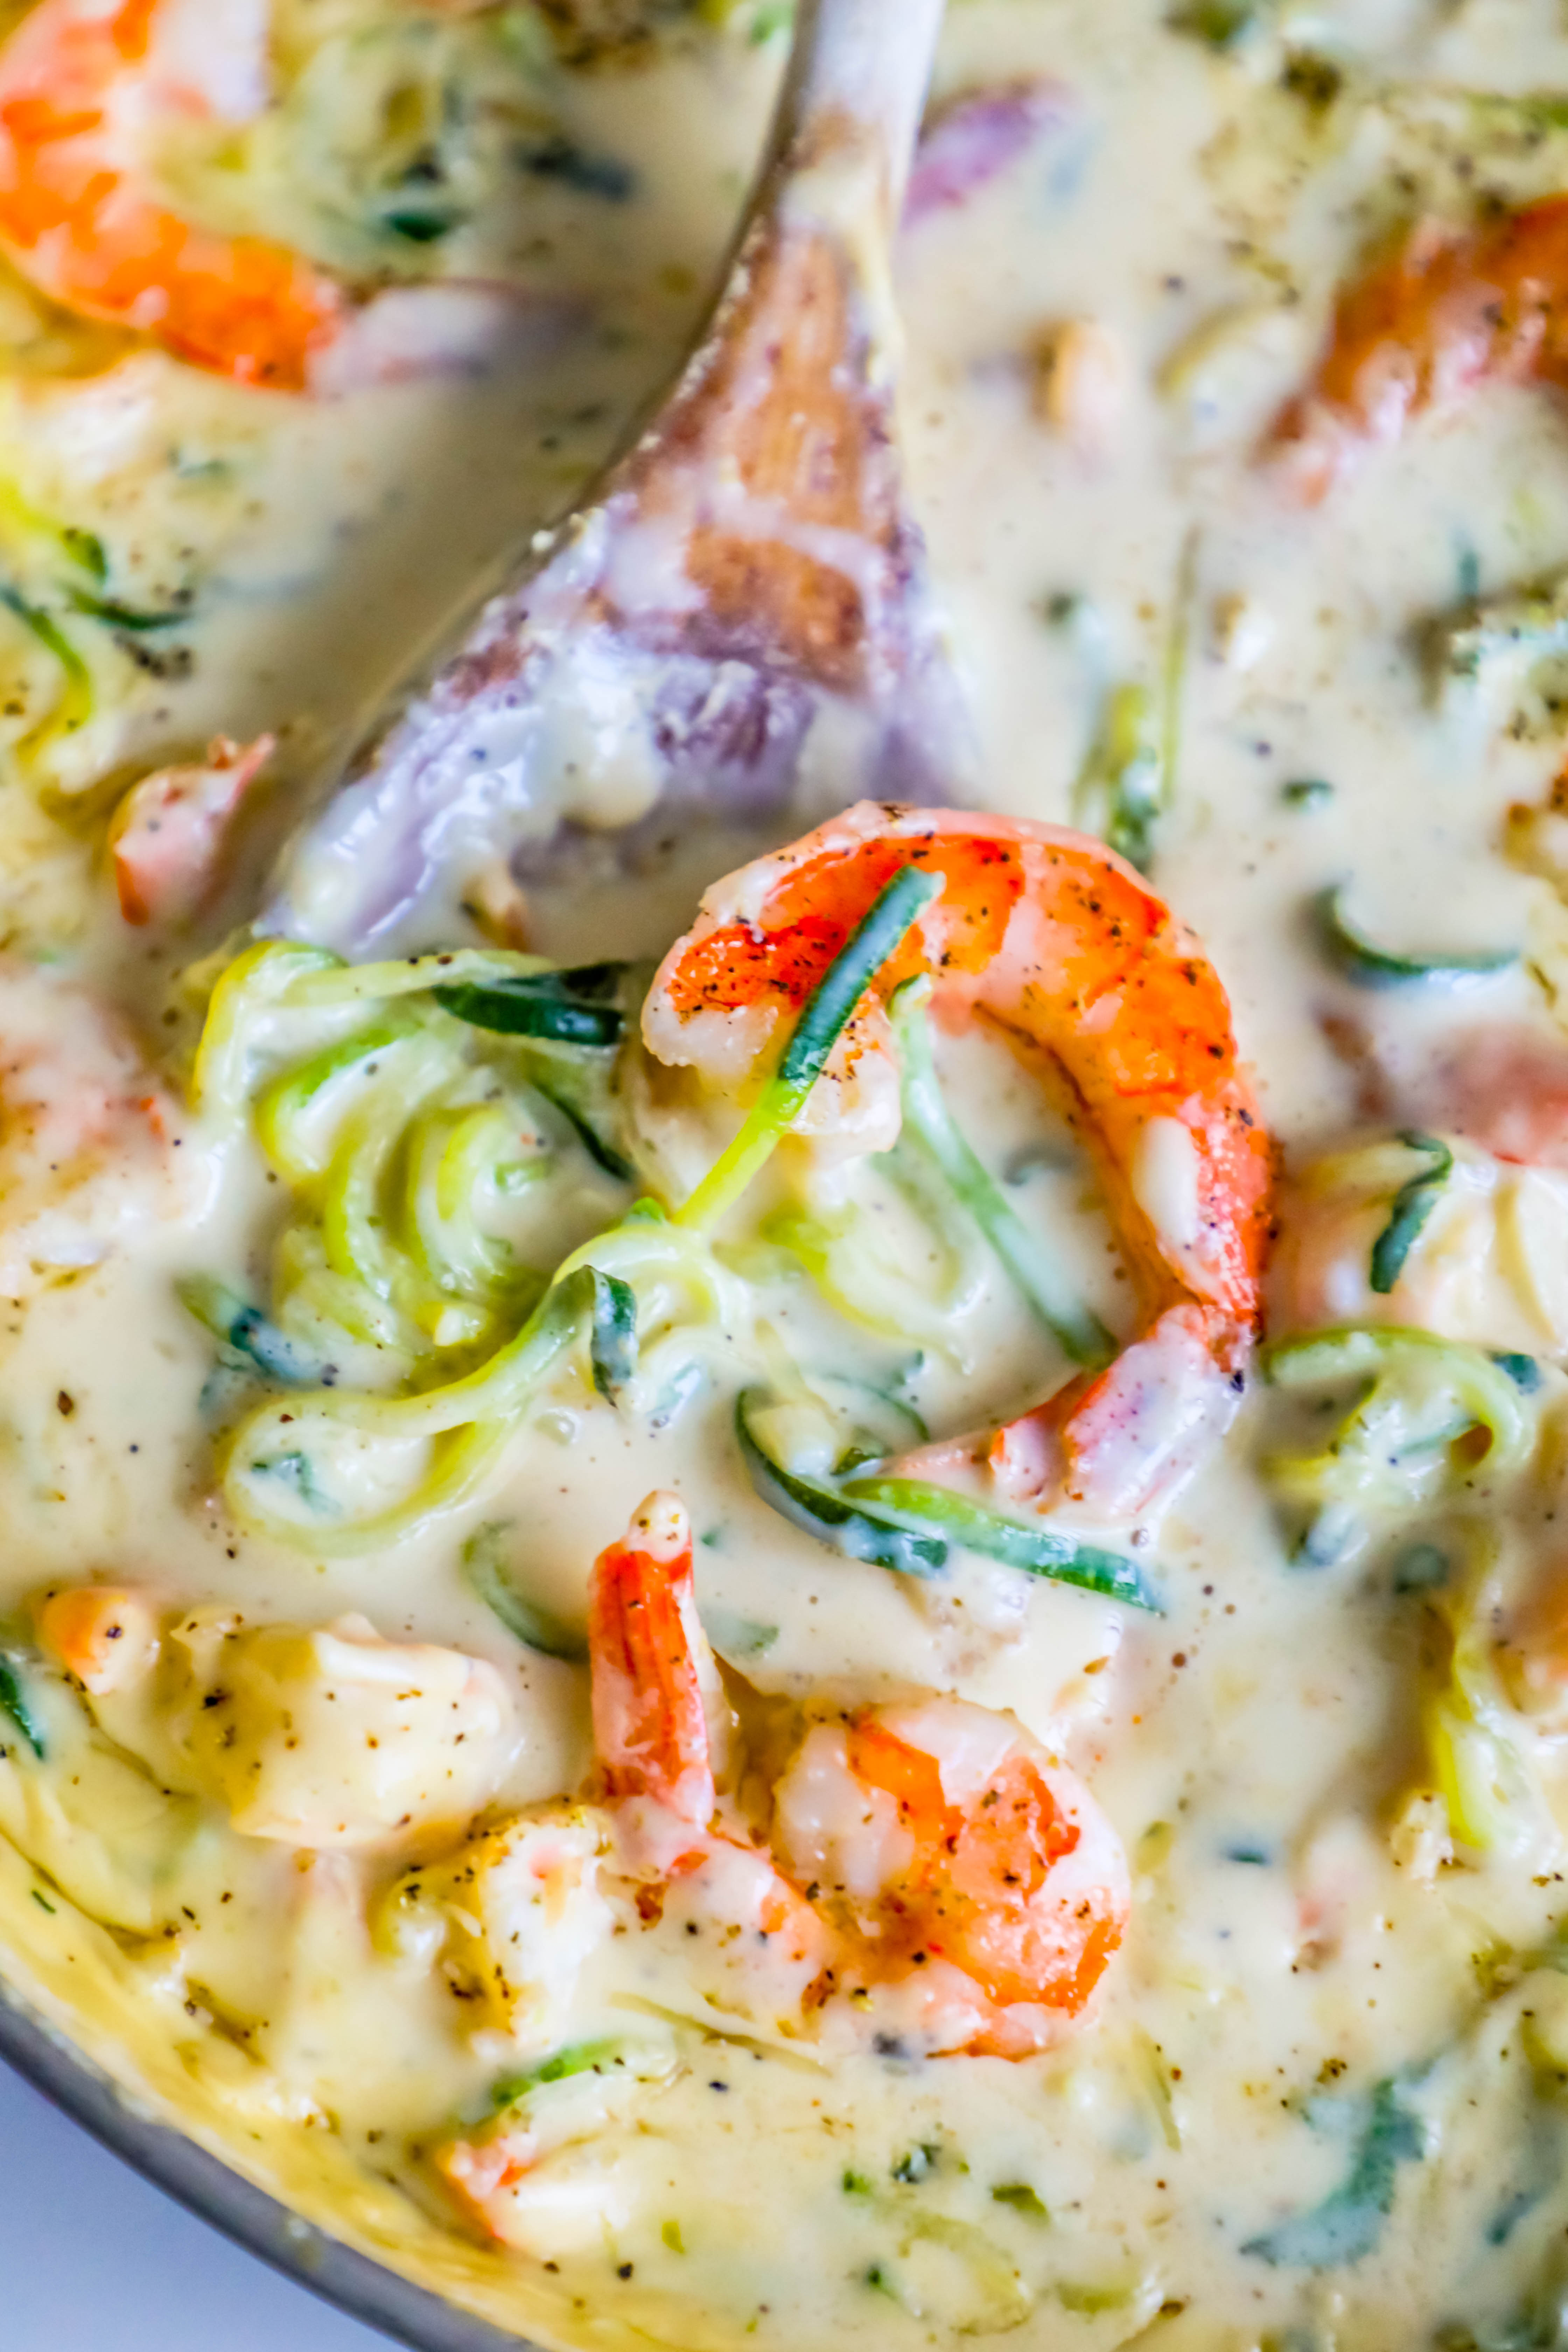 shrimp in a creamy sauce with noodles made out of zucchini